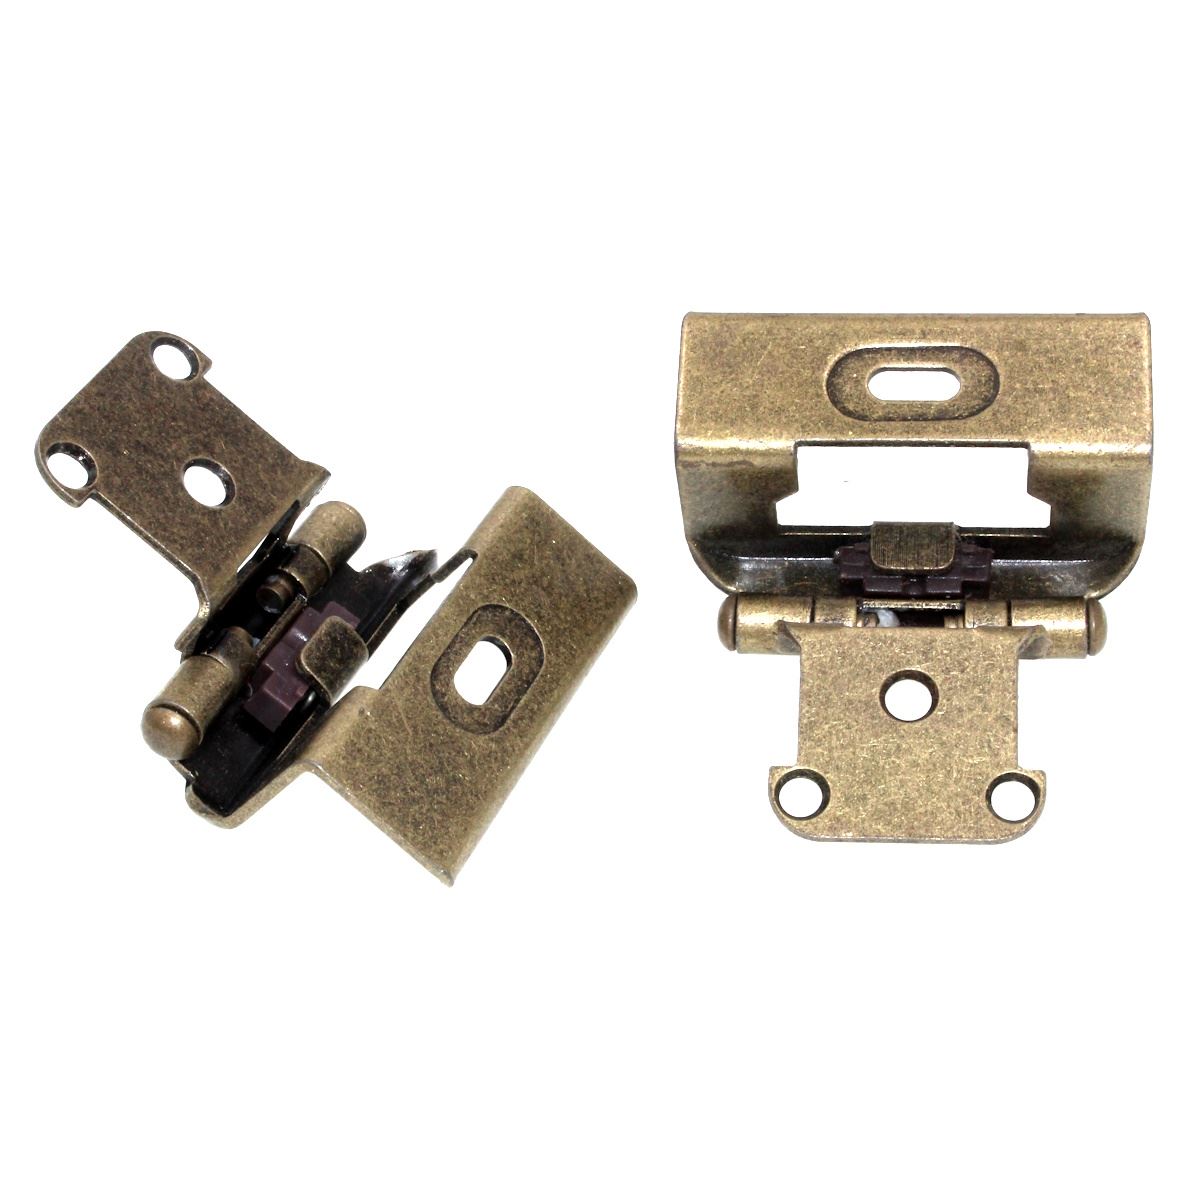 Pair of Amerock Burnished Brass Full Wrap Hinges 1/2" Overlay Self-Closing BP7541-BB